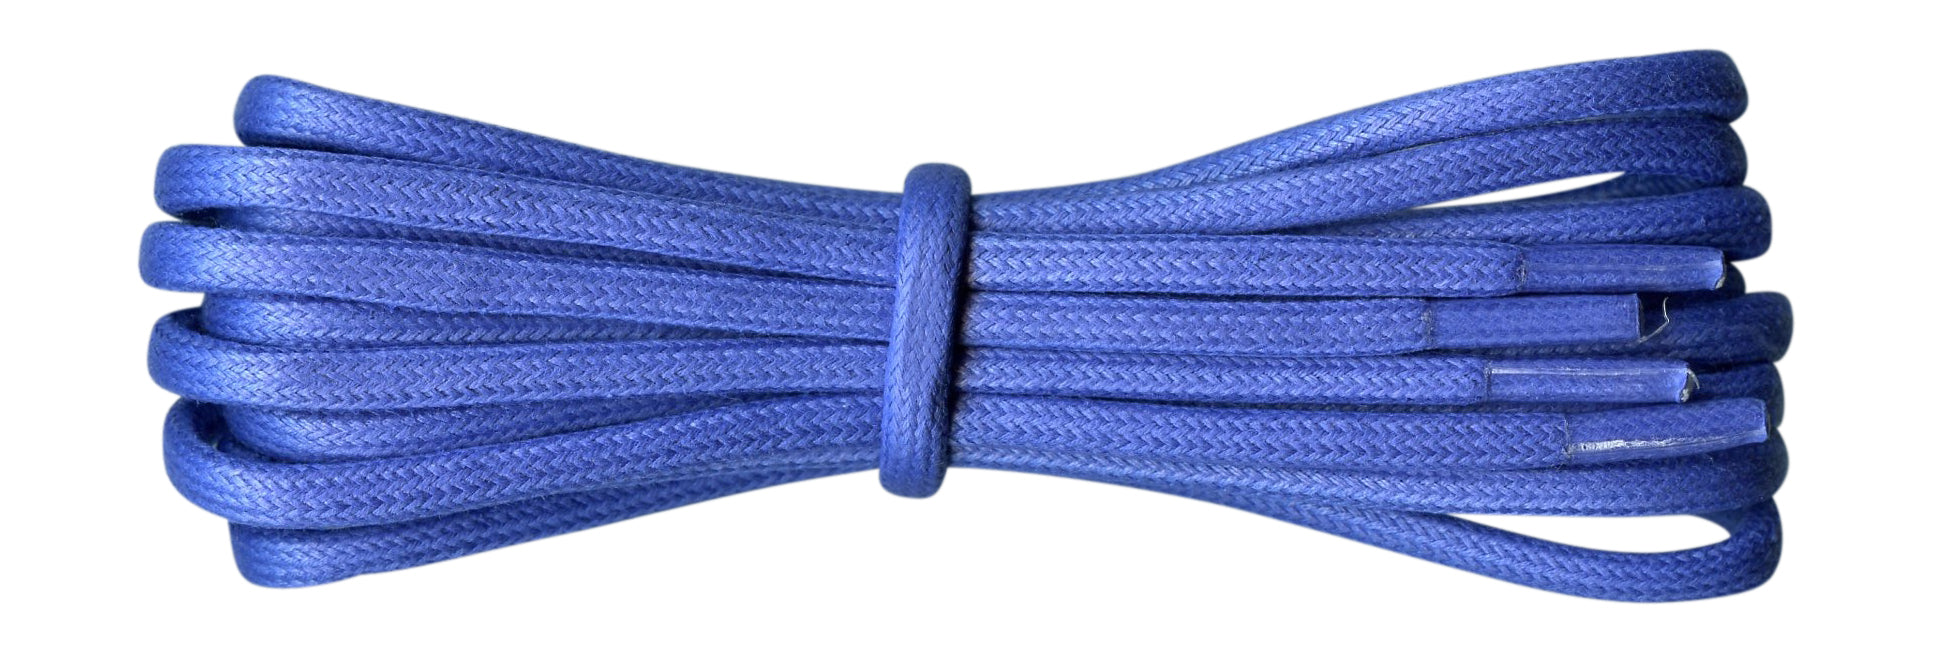 Thick Royal Blue waxed cotton boot laces 4.5 mm - fabmania shoe laces